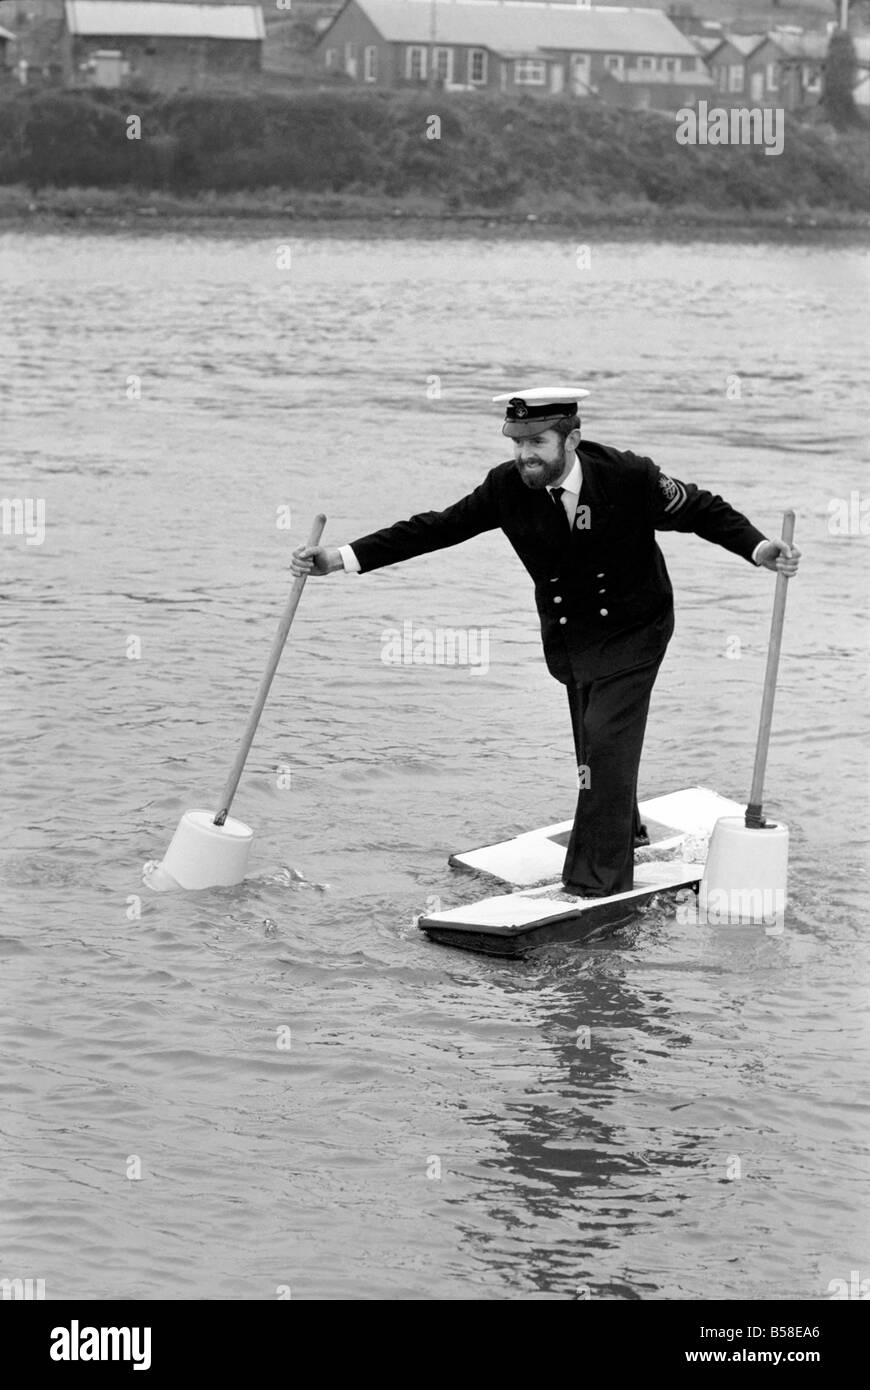 Petty officer Alan Hogarth on skis. Petty officer Alan Hogarth 33, tried out his device in Plymouth Harbour today, (he walks on Stock Photo